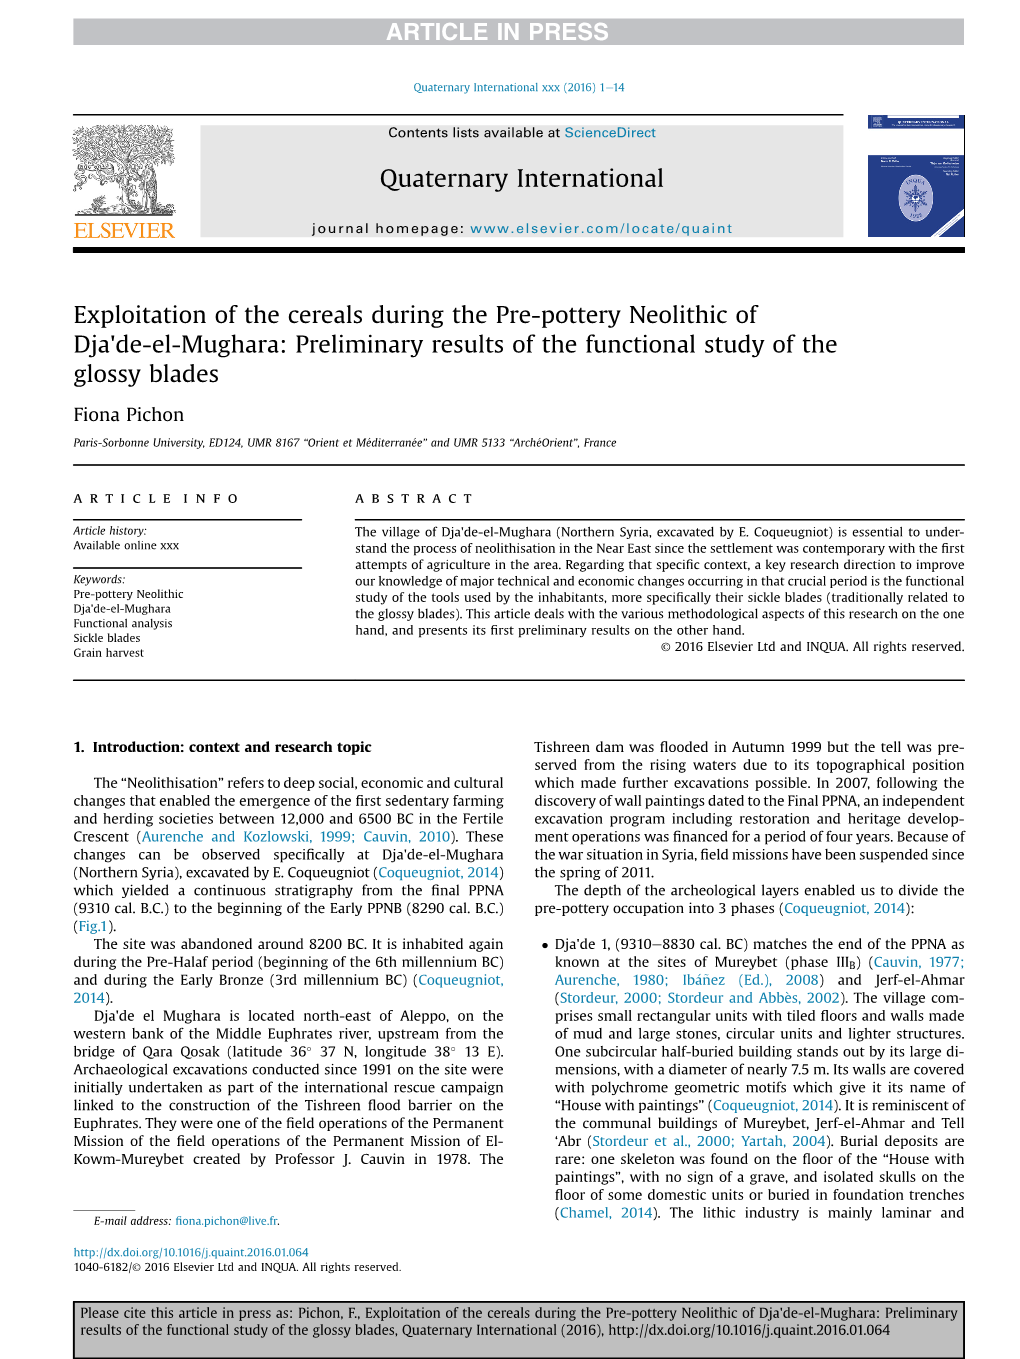 Exploitation of the Cereals During the Pre-Pottery Neolithic of Dja'de-El-Mughara: Preliminary Results of the Functional Study of the Glossy Blades